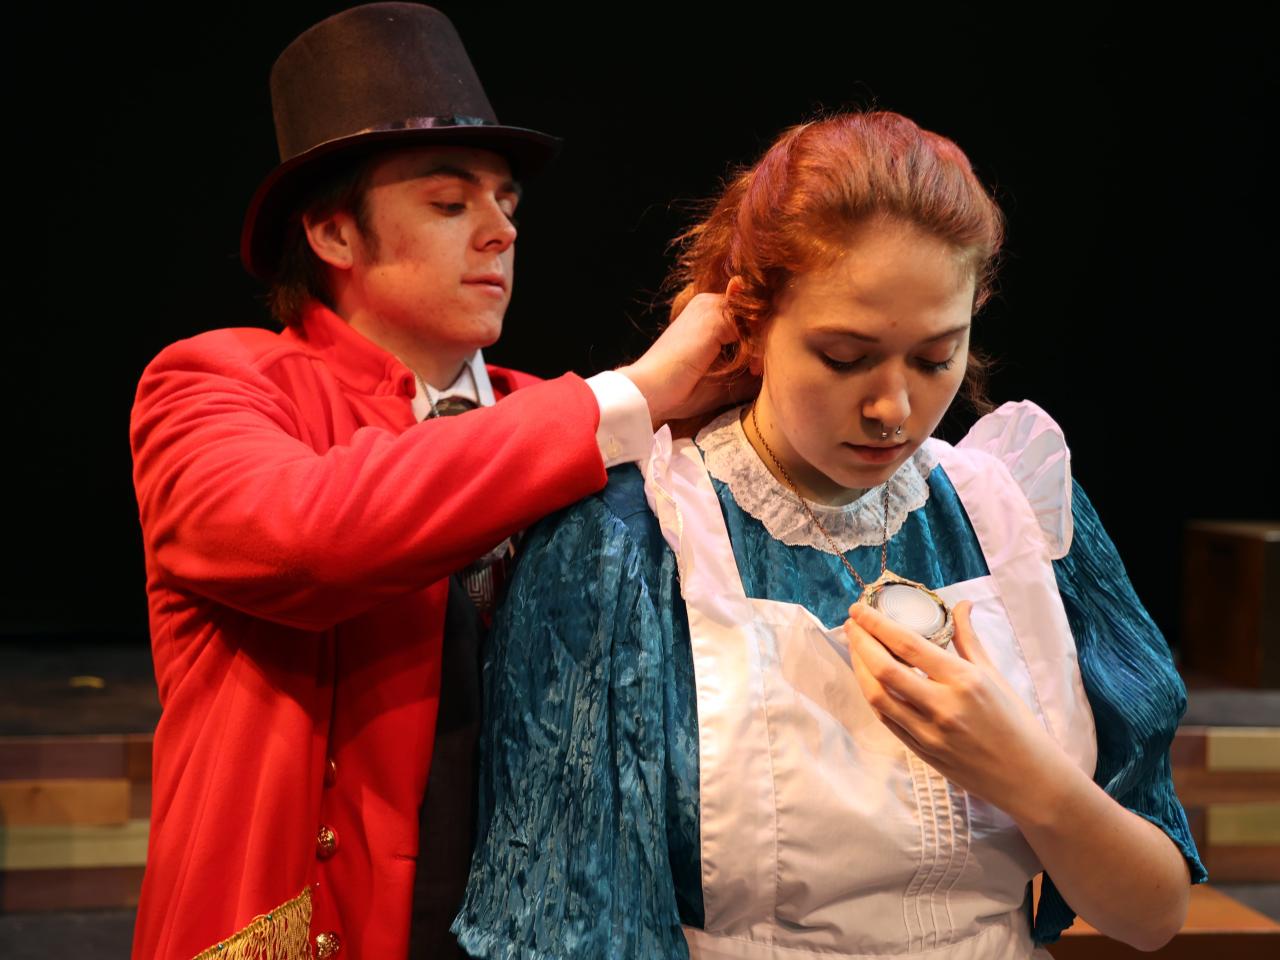 A man in a top hat and red coat puts an amulet around a woman's neck